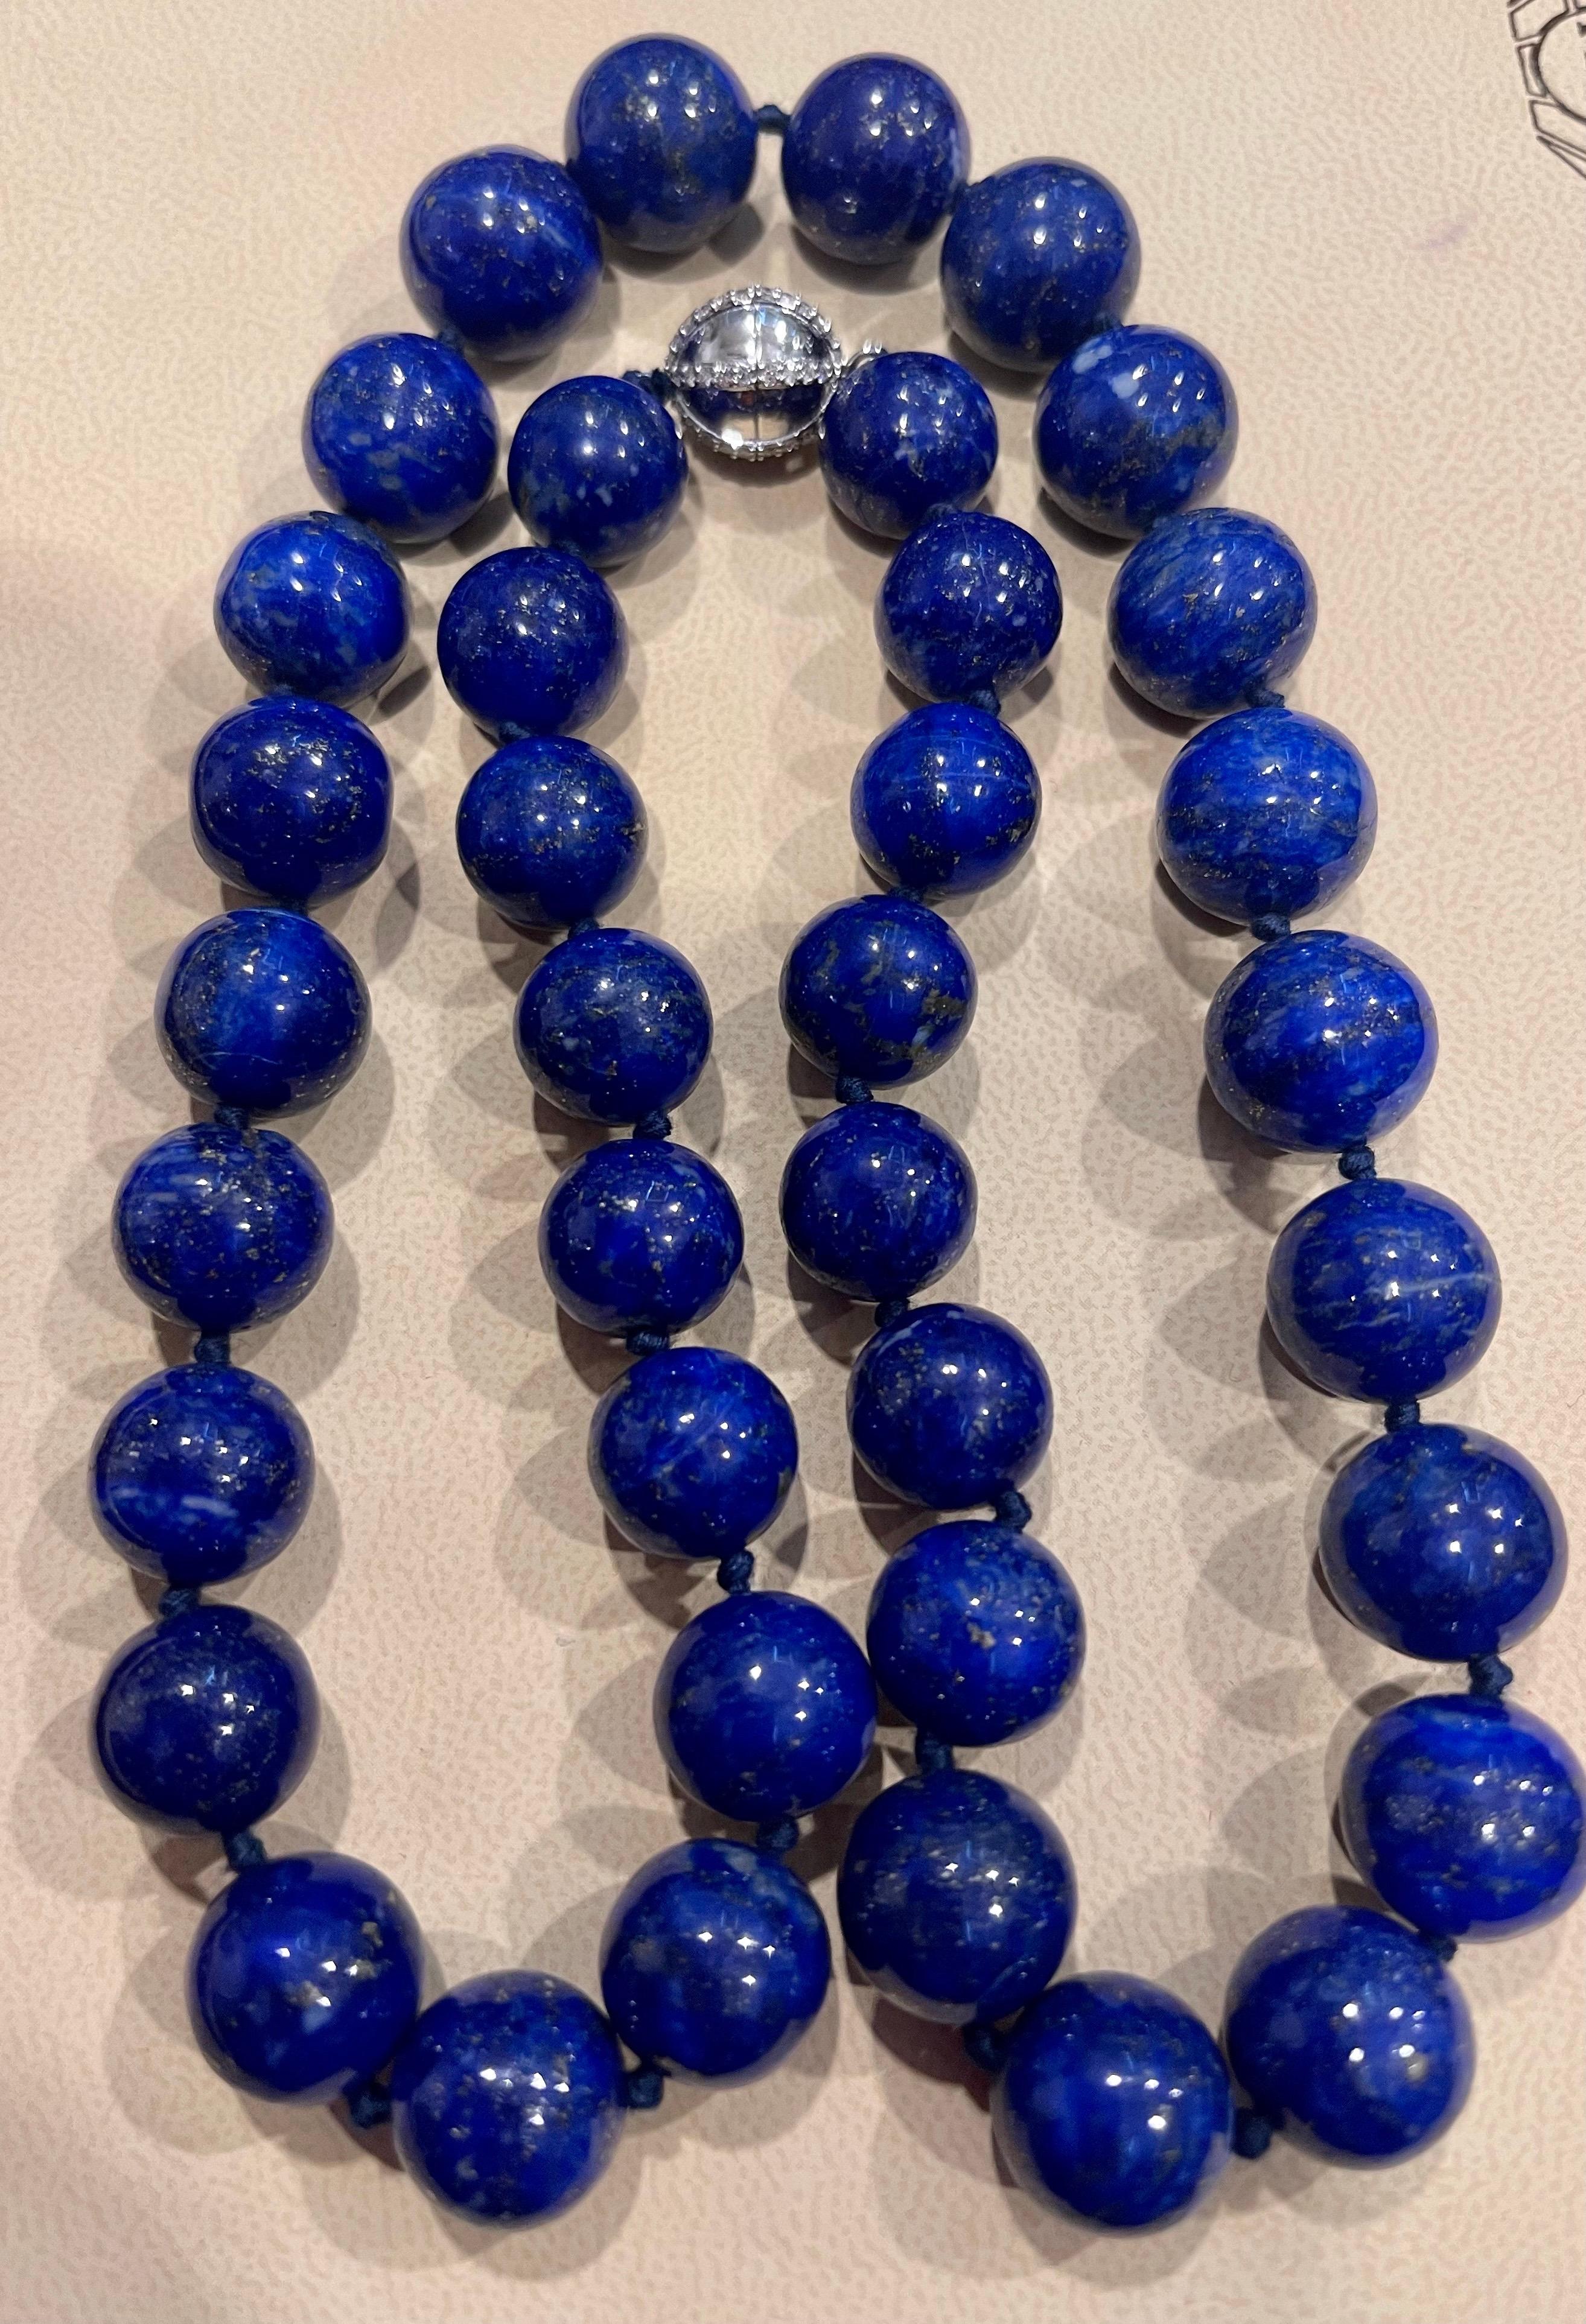 Vintage Lapis Lazuli Single Strand Necklace  with 0.8 Carat Diamond Ball  Clasp in 14 Karat  White Gold
This marvelous vintage Lapis Lazuli  necklace features 1 row of luscious  huge Beads
(measuring approximately from 15 MM to 13 MM)  . It is a